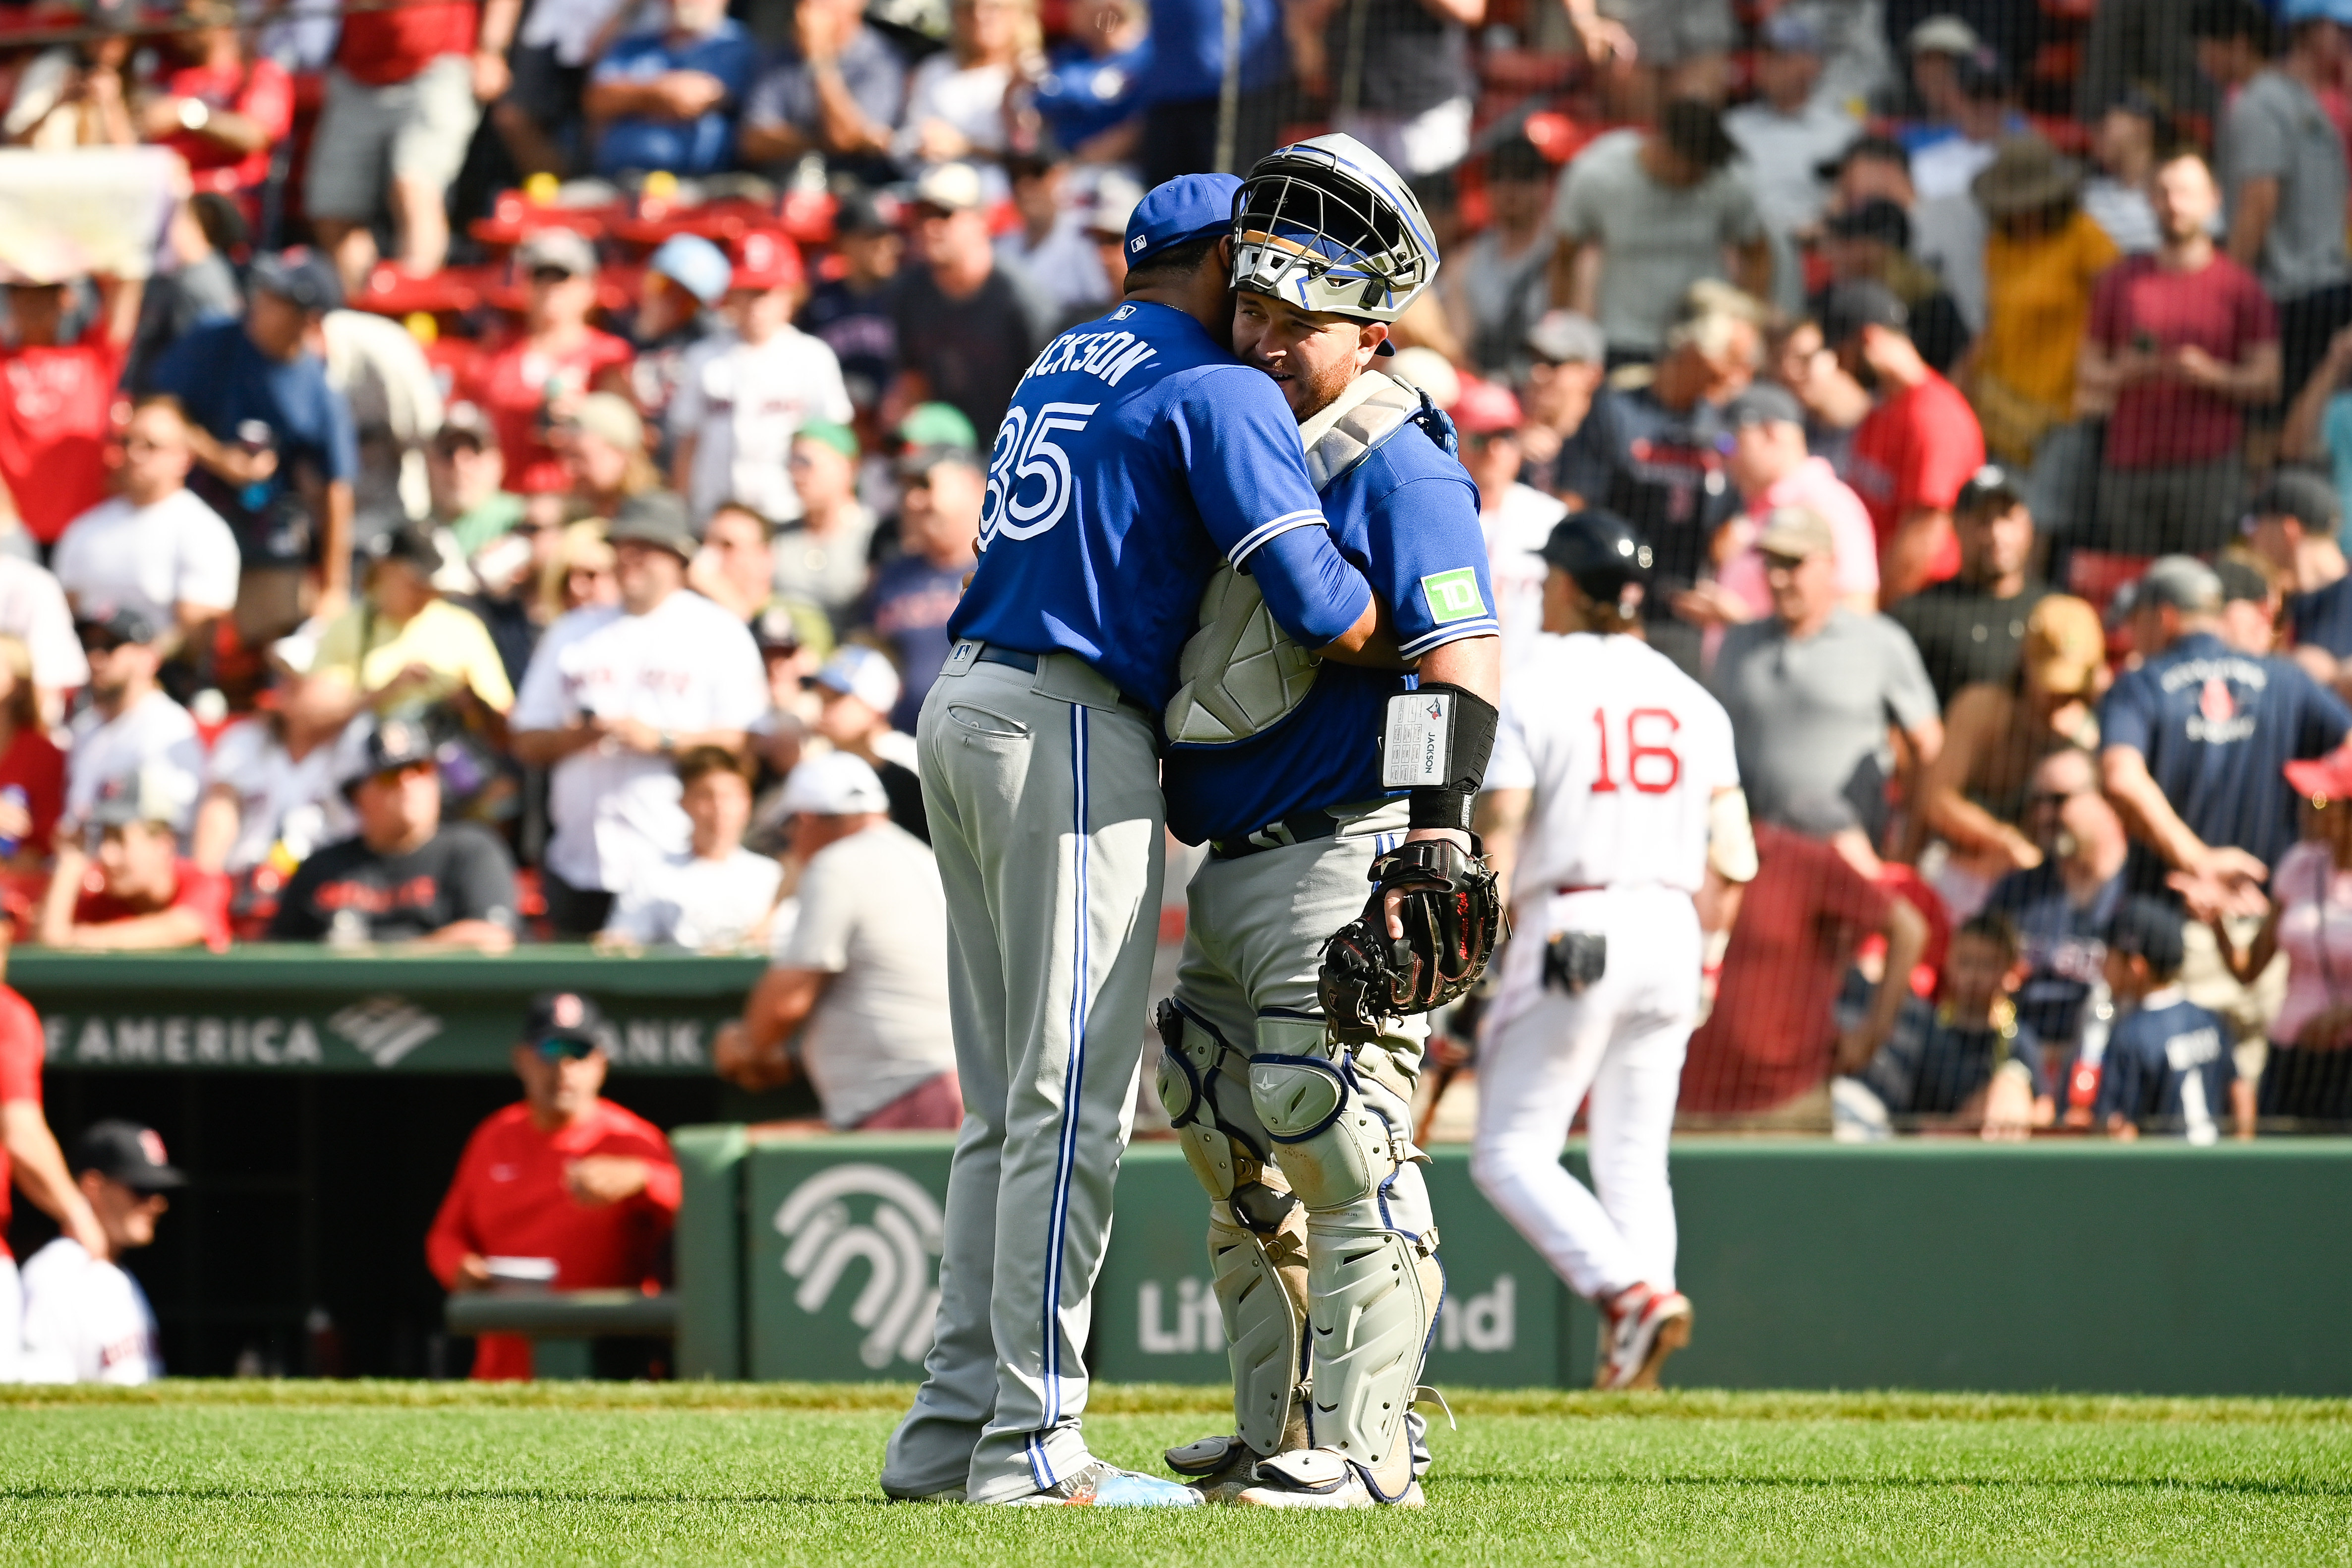 Red Sox held to just 3 hits, but still edge Blue Jays at Fenway